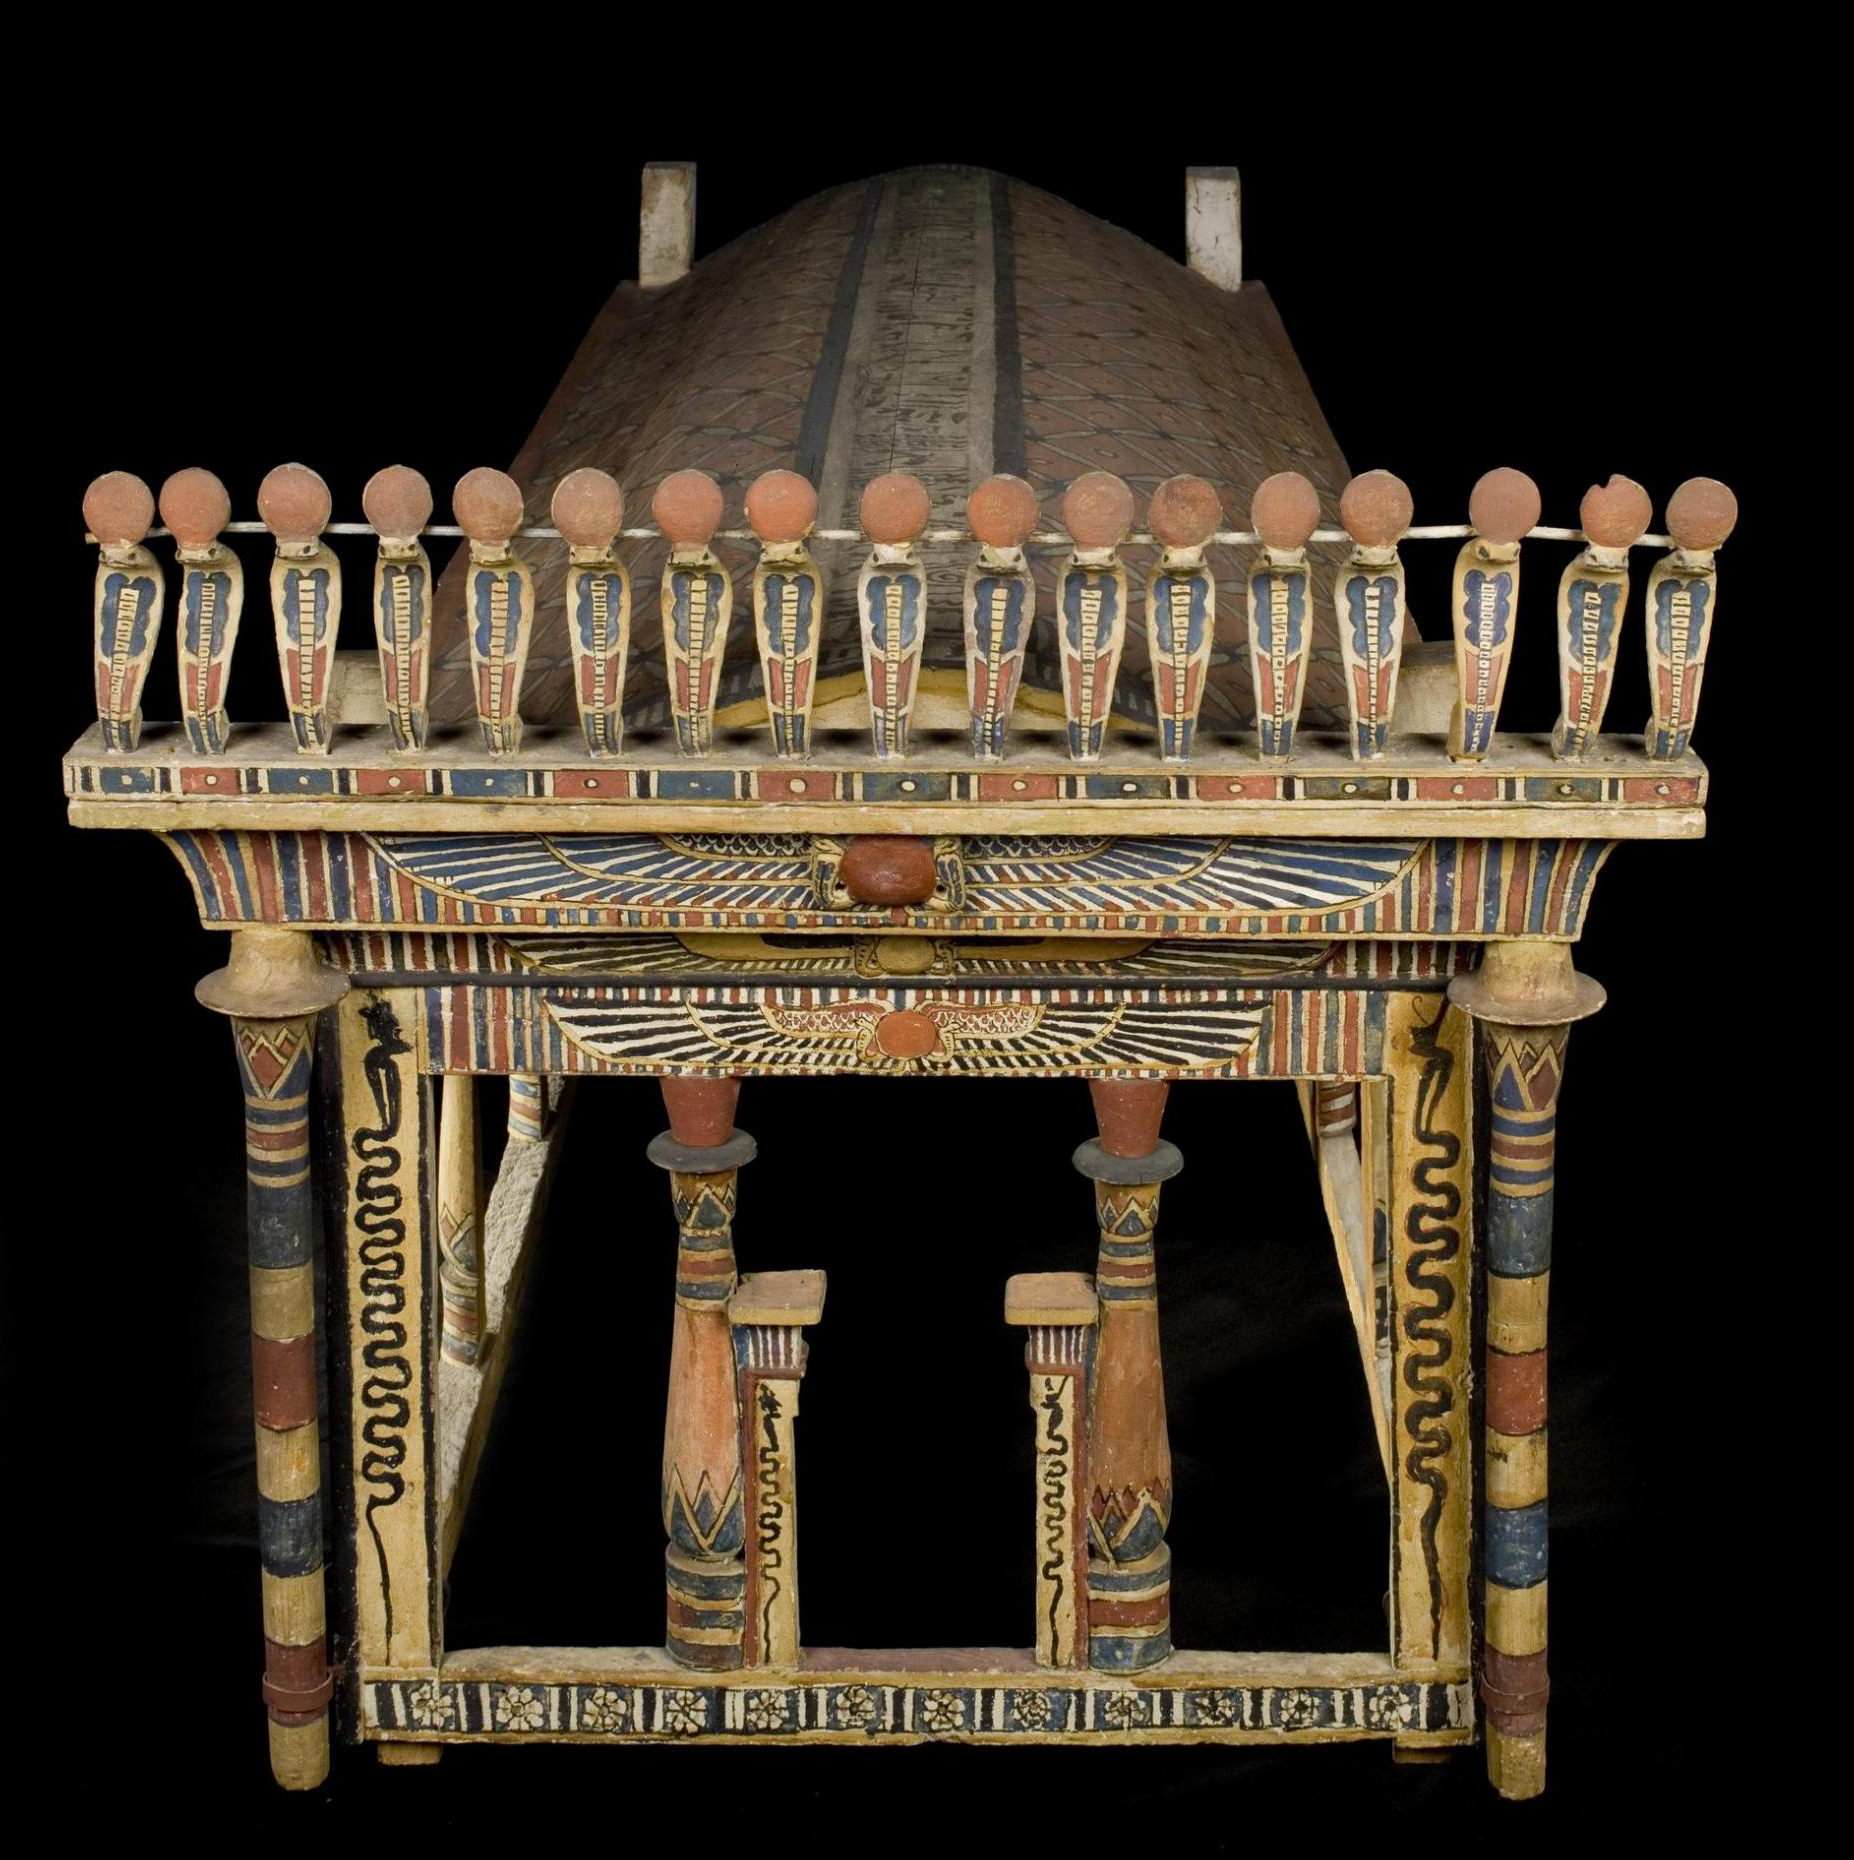 Canopy of sycamore-fig wood painted in red, black, blue, yellow and white in the shape of a shrine, with an arched roof and corner-posts : Ancient Egyptian, excavated at Sheikh Abd el-Qurna, Thebes, c.9BC.